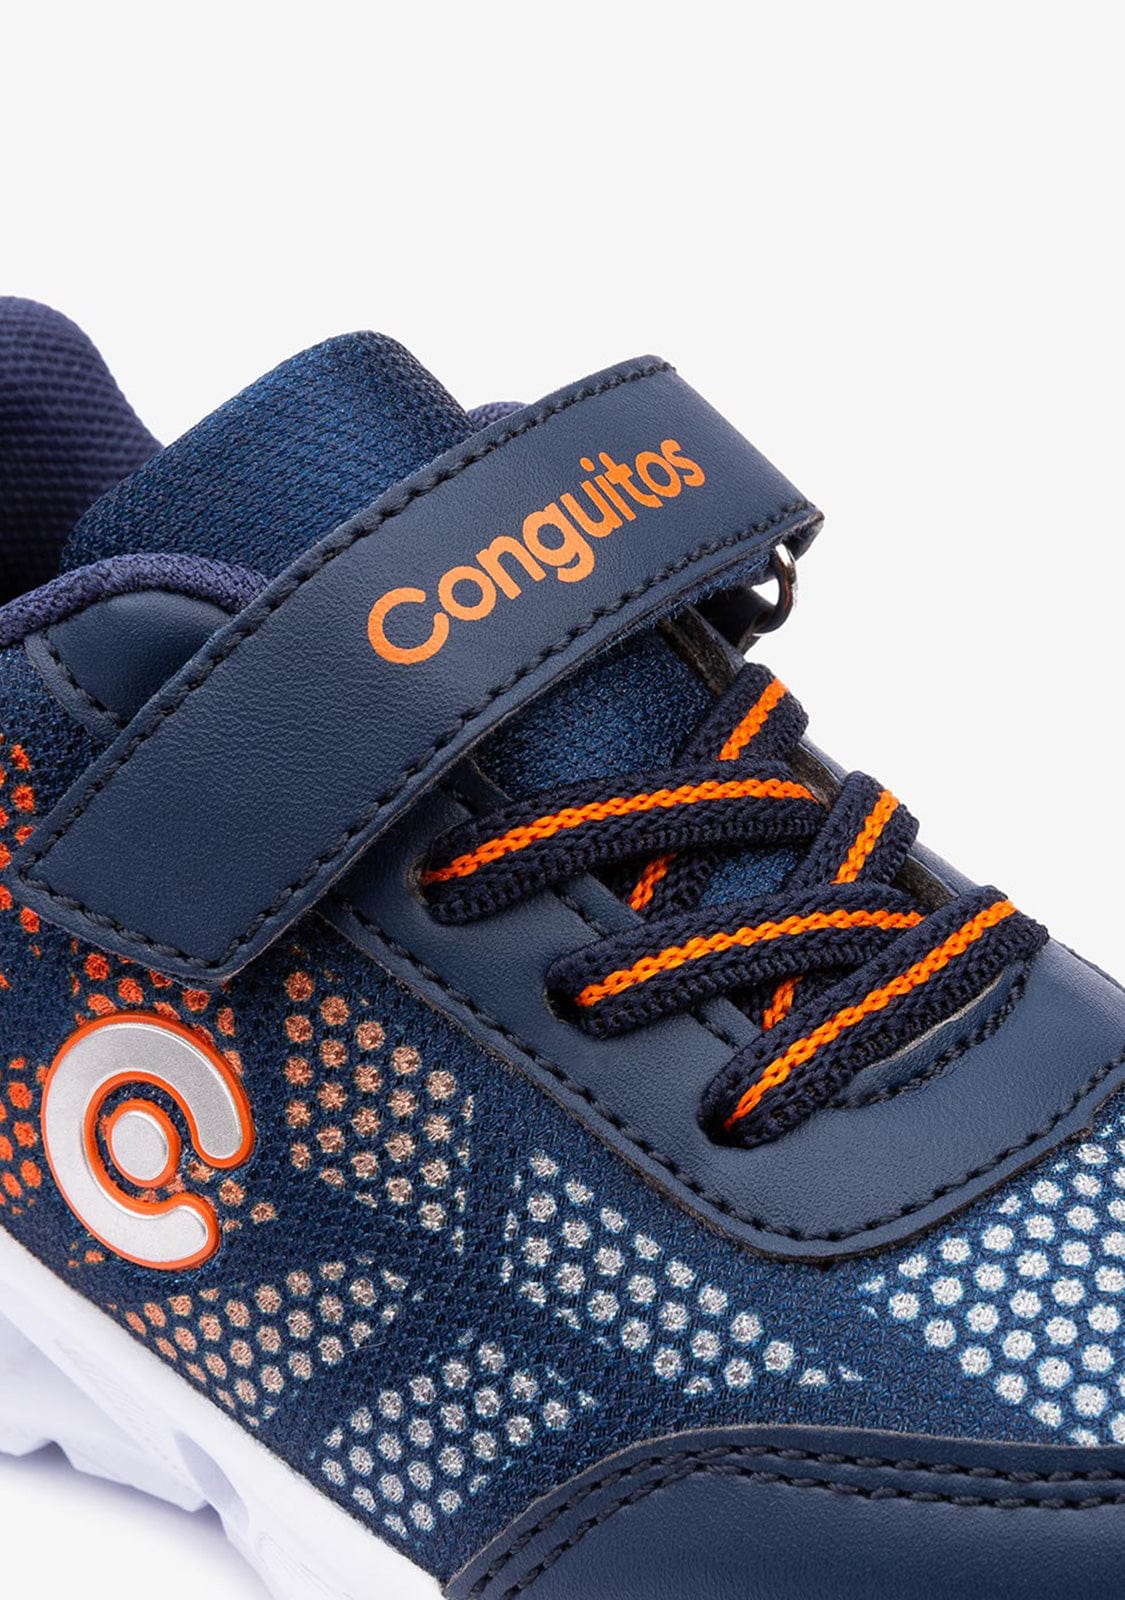 CONGUITOS Shoes Boy's Navy With Lights Conguitos Sneakers